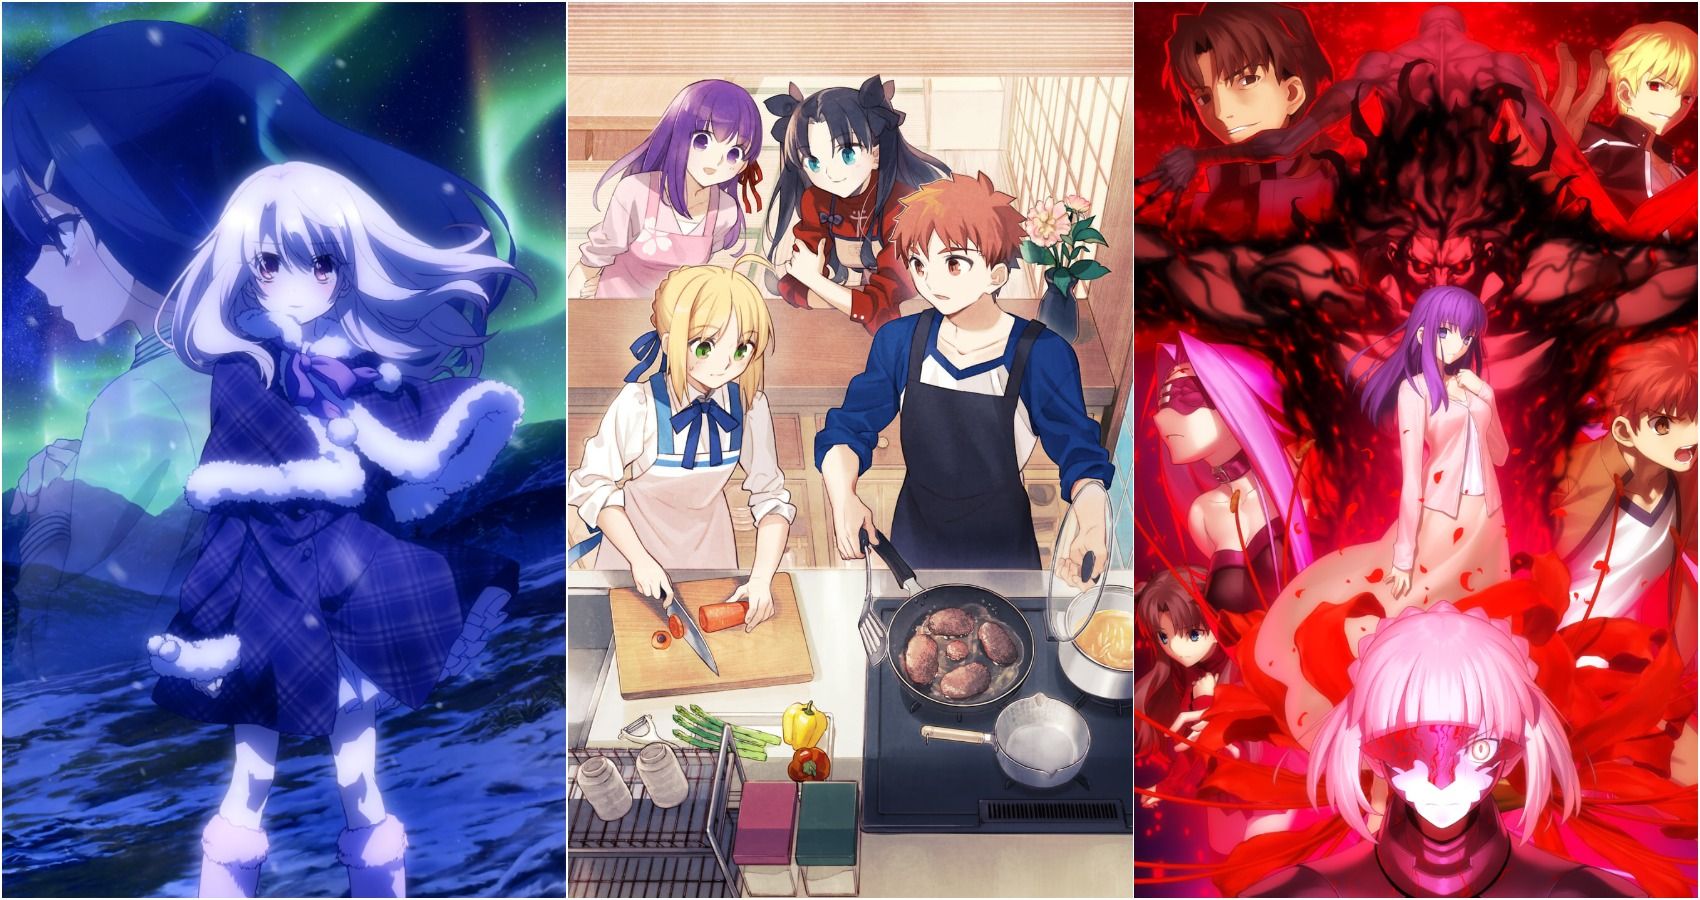 Best Fate Anime Watch Order: Series and Movies (Recommended List)